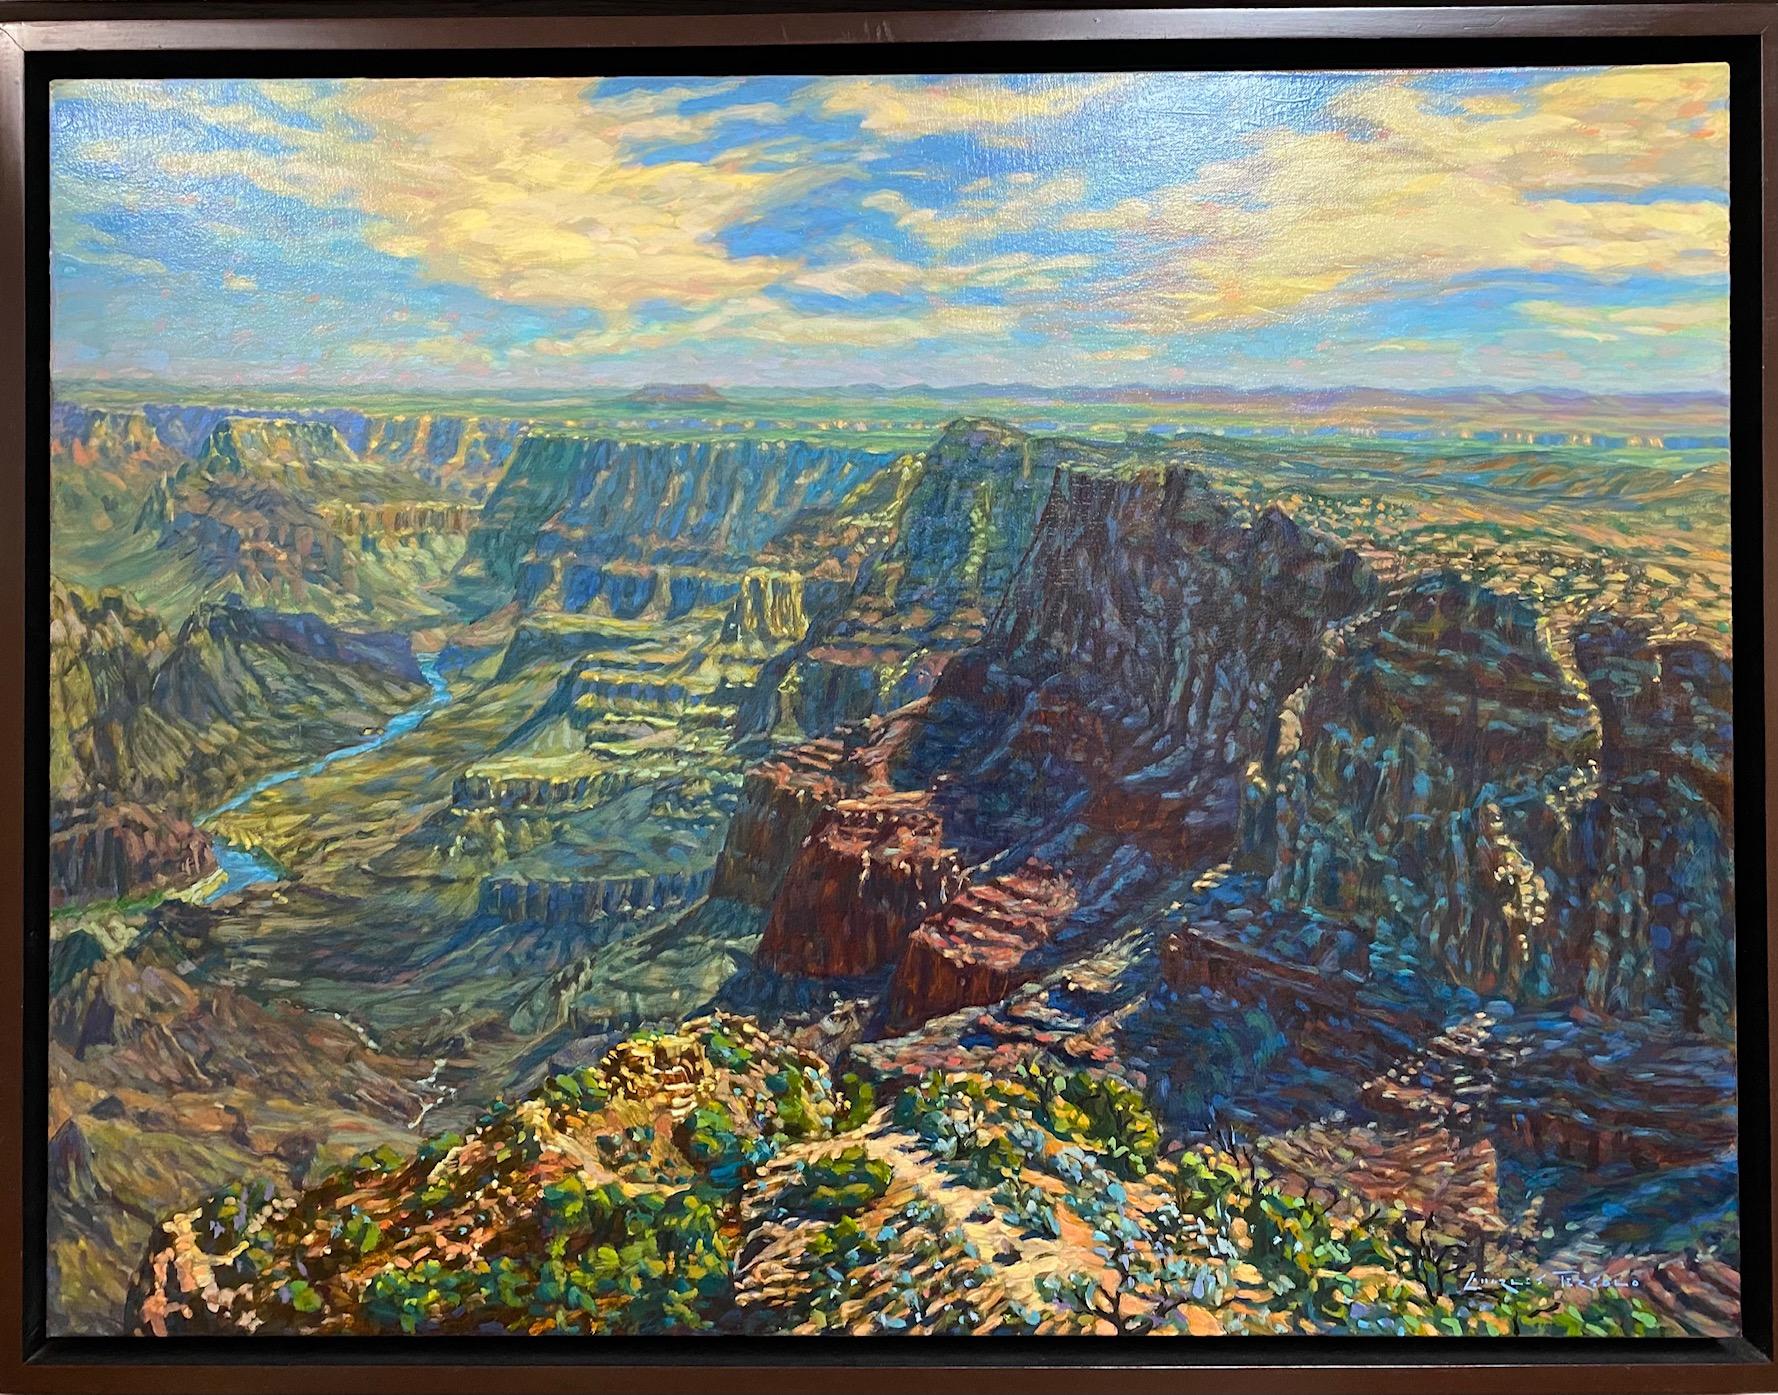 Charles Tersolo Landscape Painting - East of Eden, the Grand Canyon, original 30x40 expressionist landscape